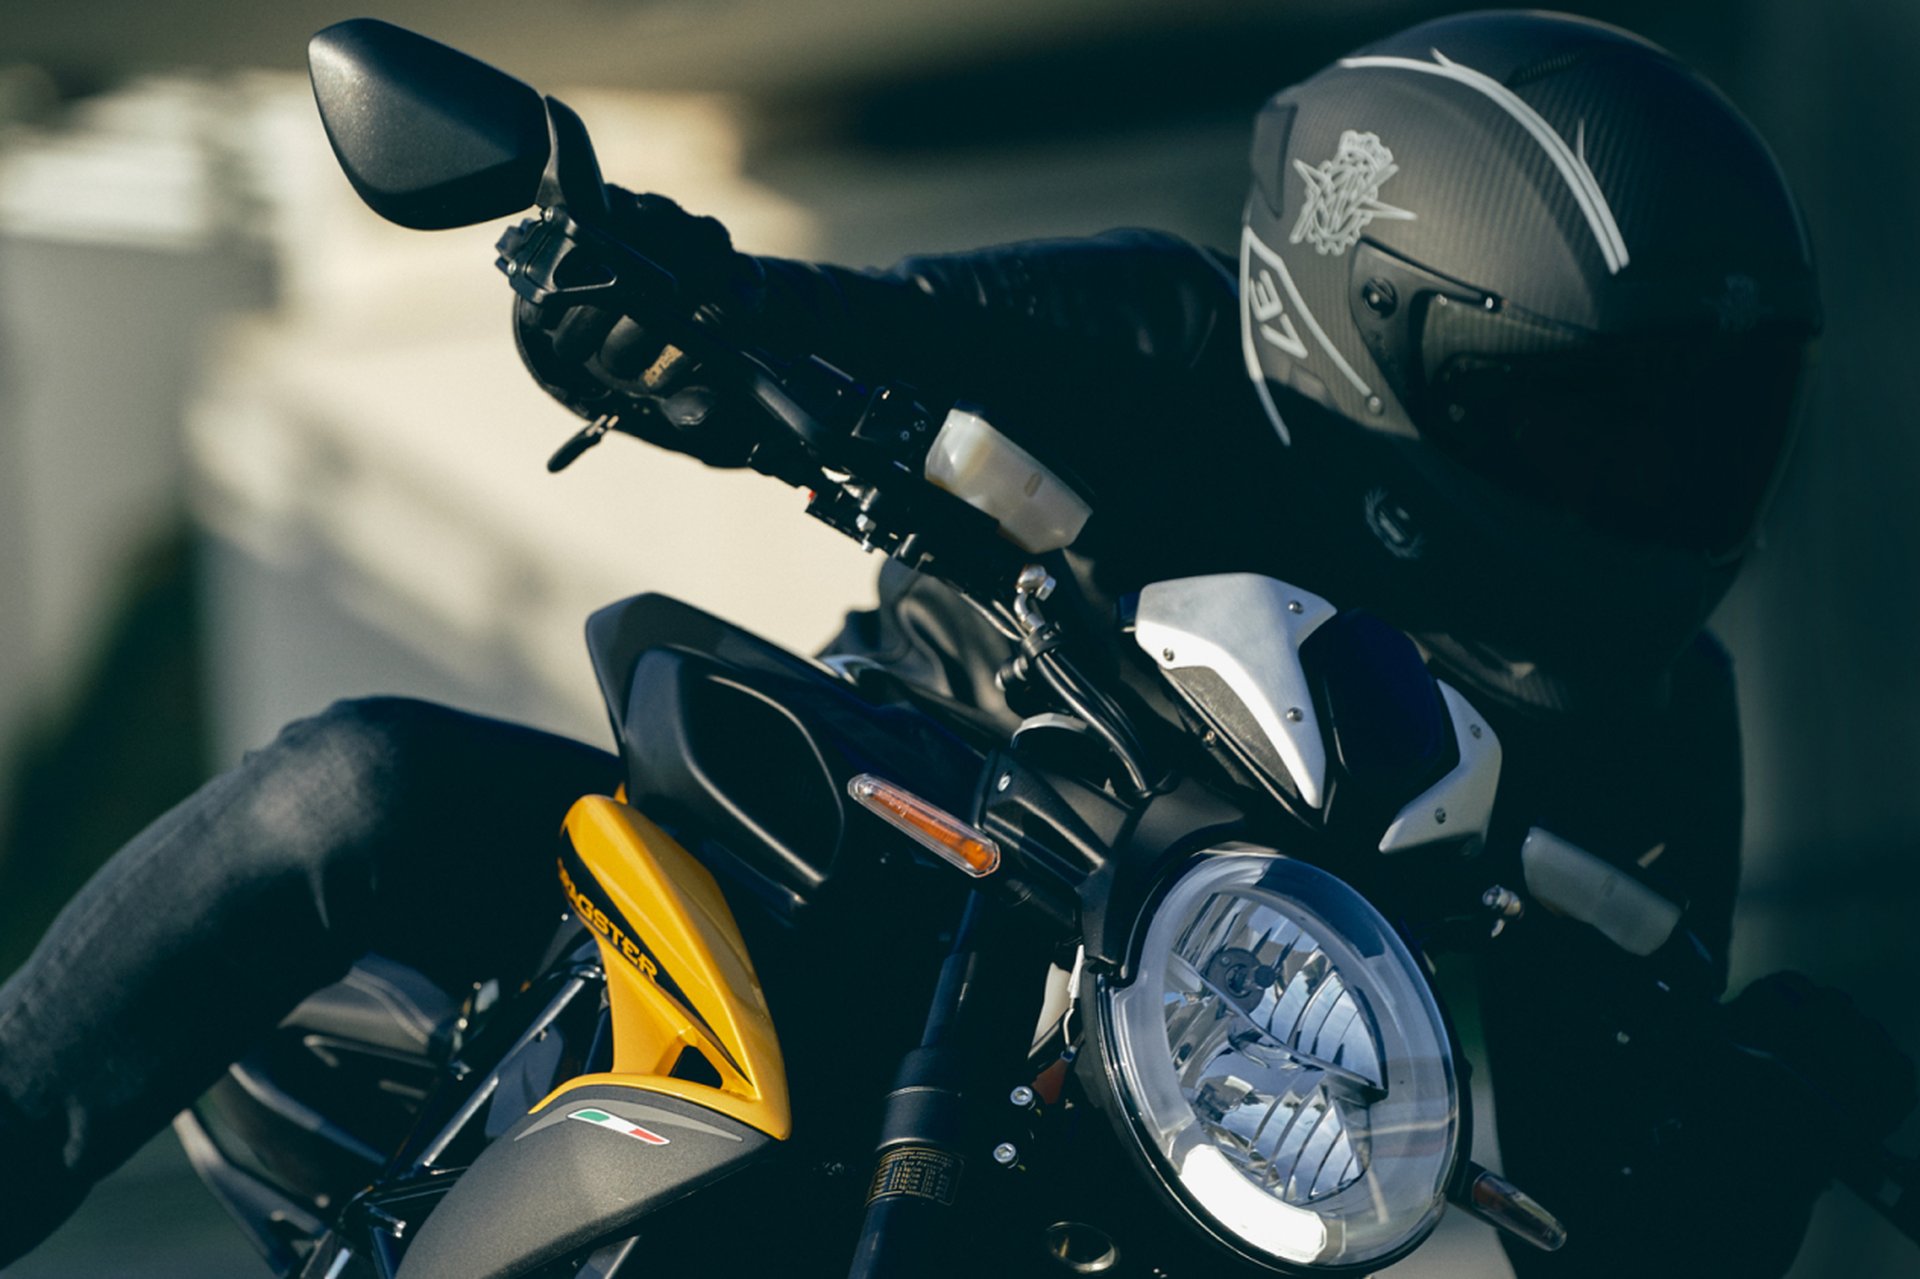 24 months free roadside assistance when buying one of the brand’s motorbikes